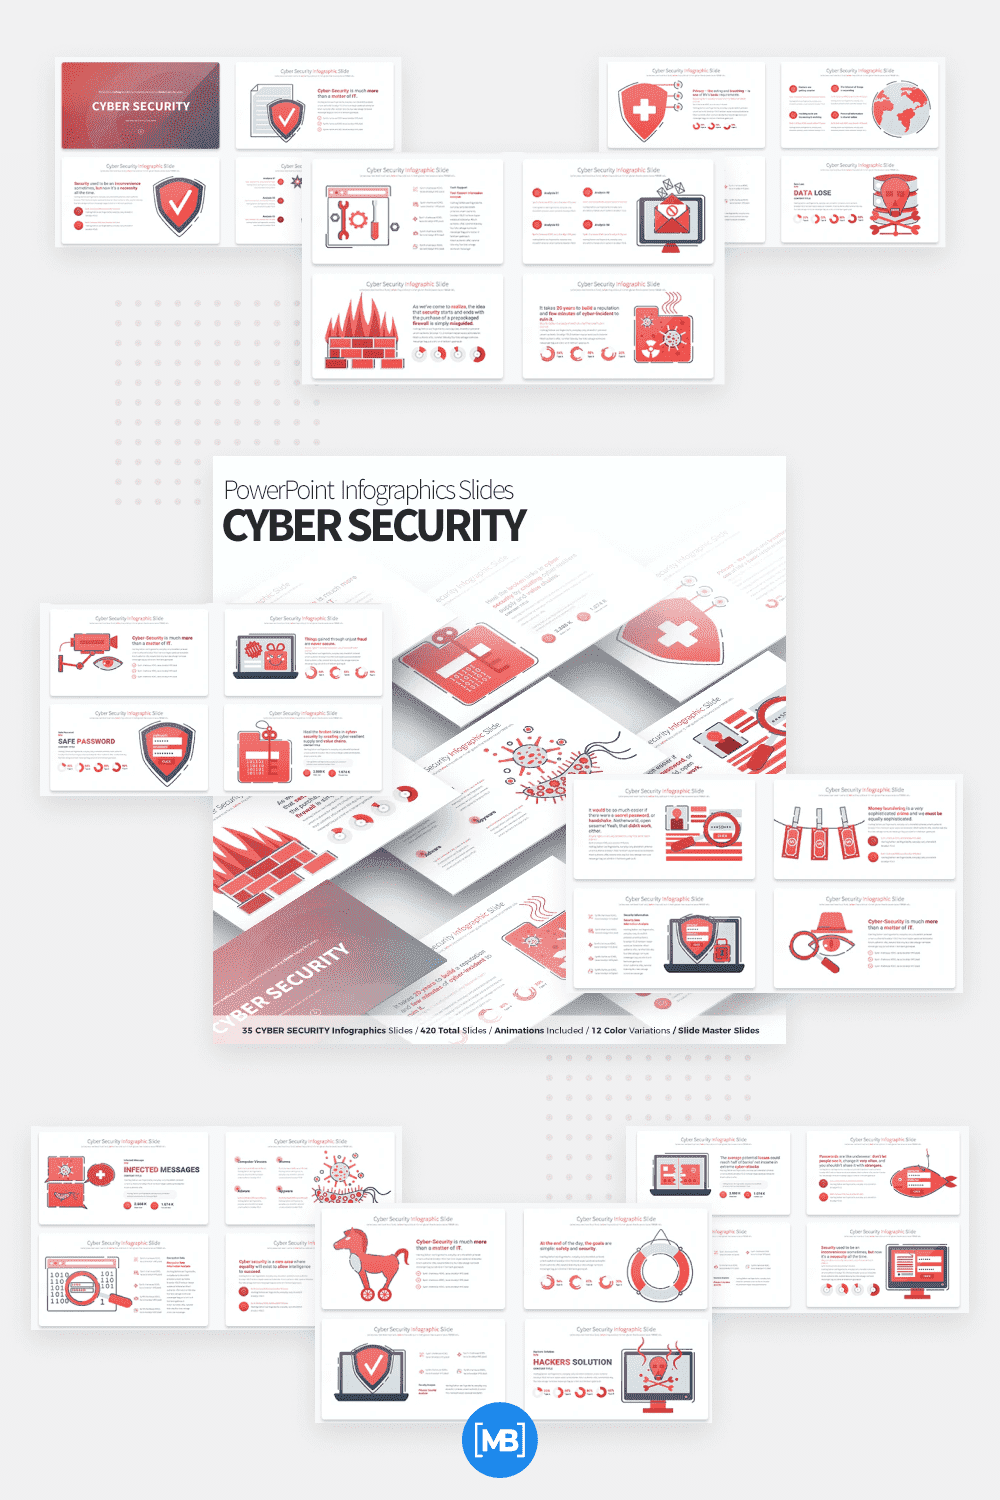 Cyber security powerpoint infographics slides.